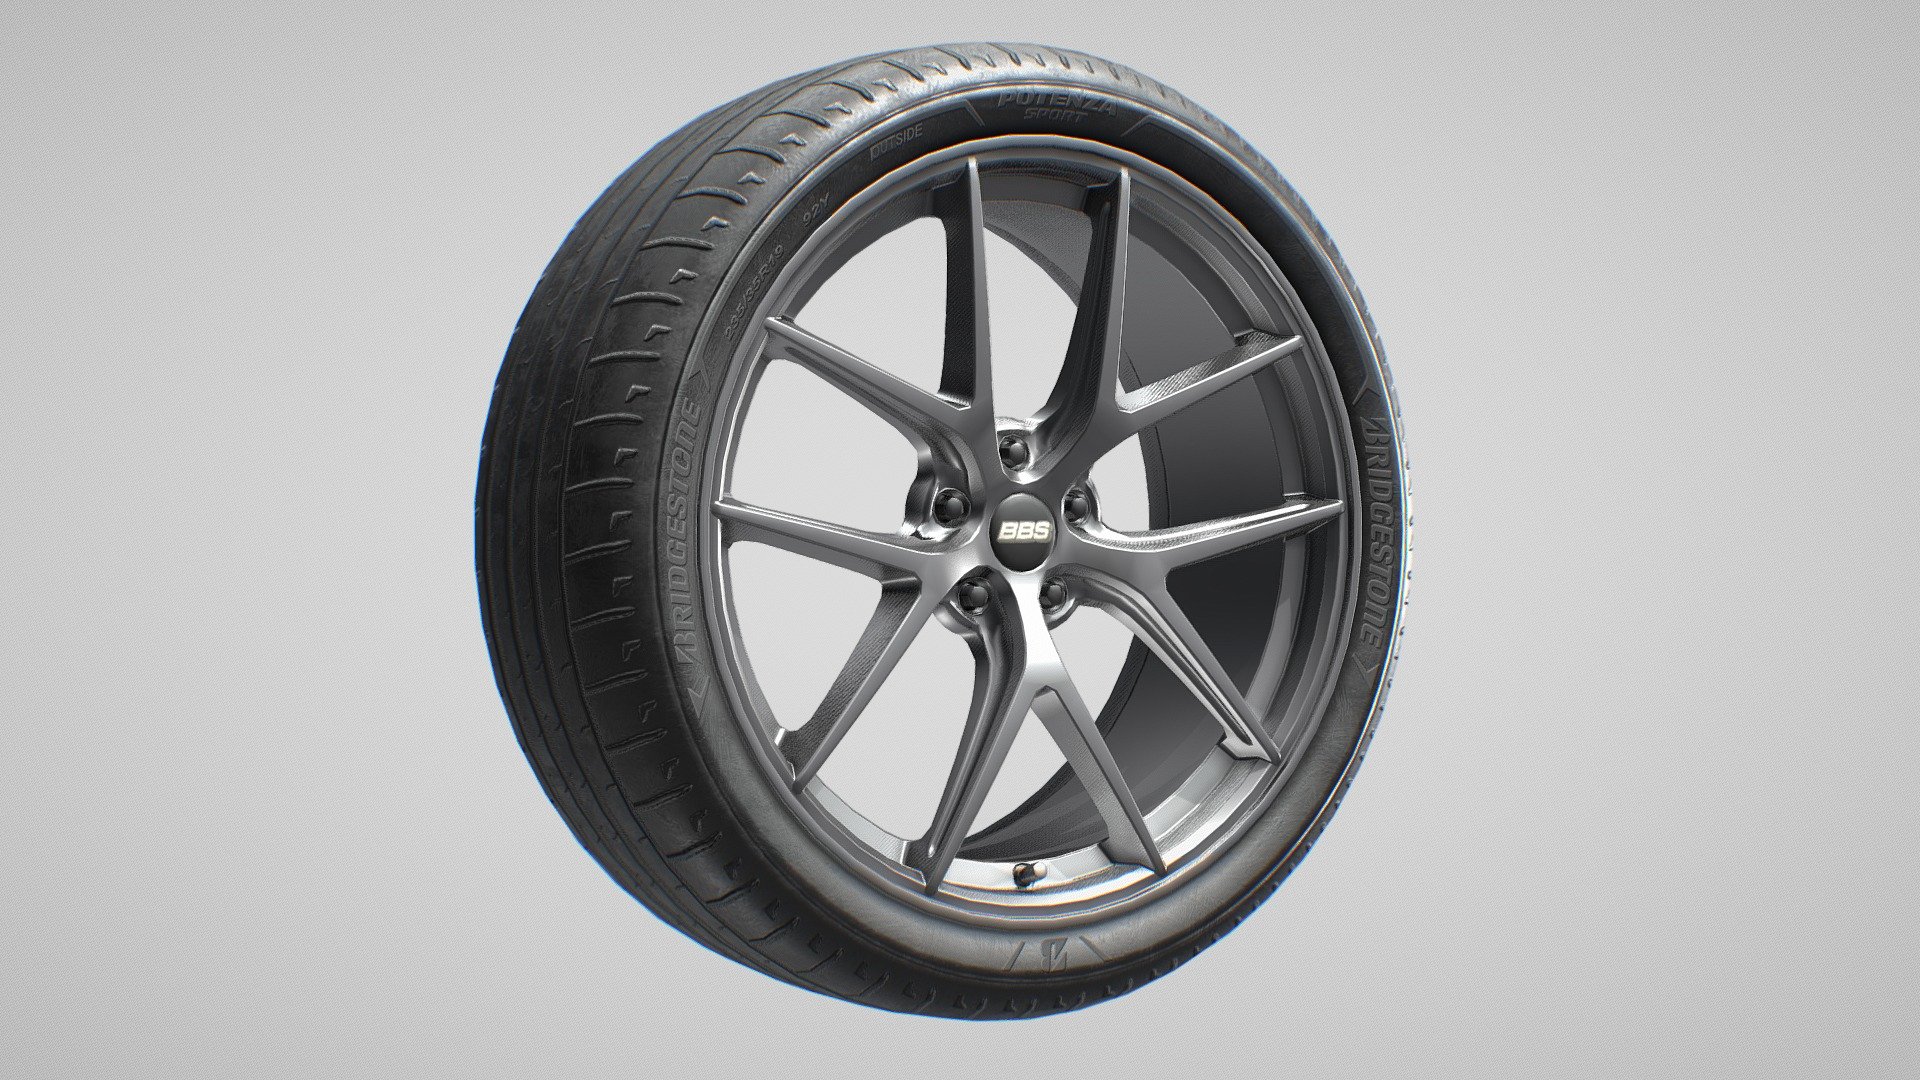 A 3D Model of BBS CI-R rim with Bridgestone Potenza Sport tire. Tire size 235/35R19, Rim size 8x19 inches. The decals on the tire match with the mentioned size.

Model Specification:


Quad based topology with very few triangulation
Varied Texel Density based one the complexity of mesh parts
2048x2048 texture size
Unreal Engine texture set available
Unity Texture set available

Notes: The inner part of the rim is also modeled in case of rim only usage without the tire.



Update 29/07/2022:
- Fix Naming issues, supposedly Bridgestone Potenza Sport instead of Michelin Pilot Sport 5
- Now Available for purchase - BBS CI-R + Bridgestone Potenza Sport - Buy Royalty Free 3D model by Mozzarellarch 3d model